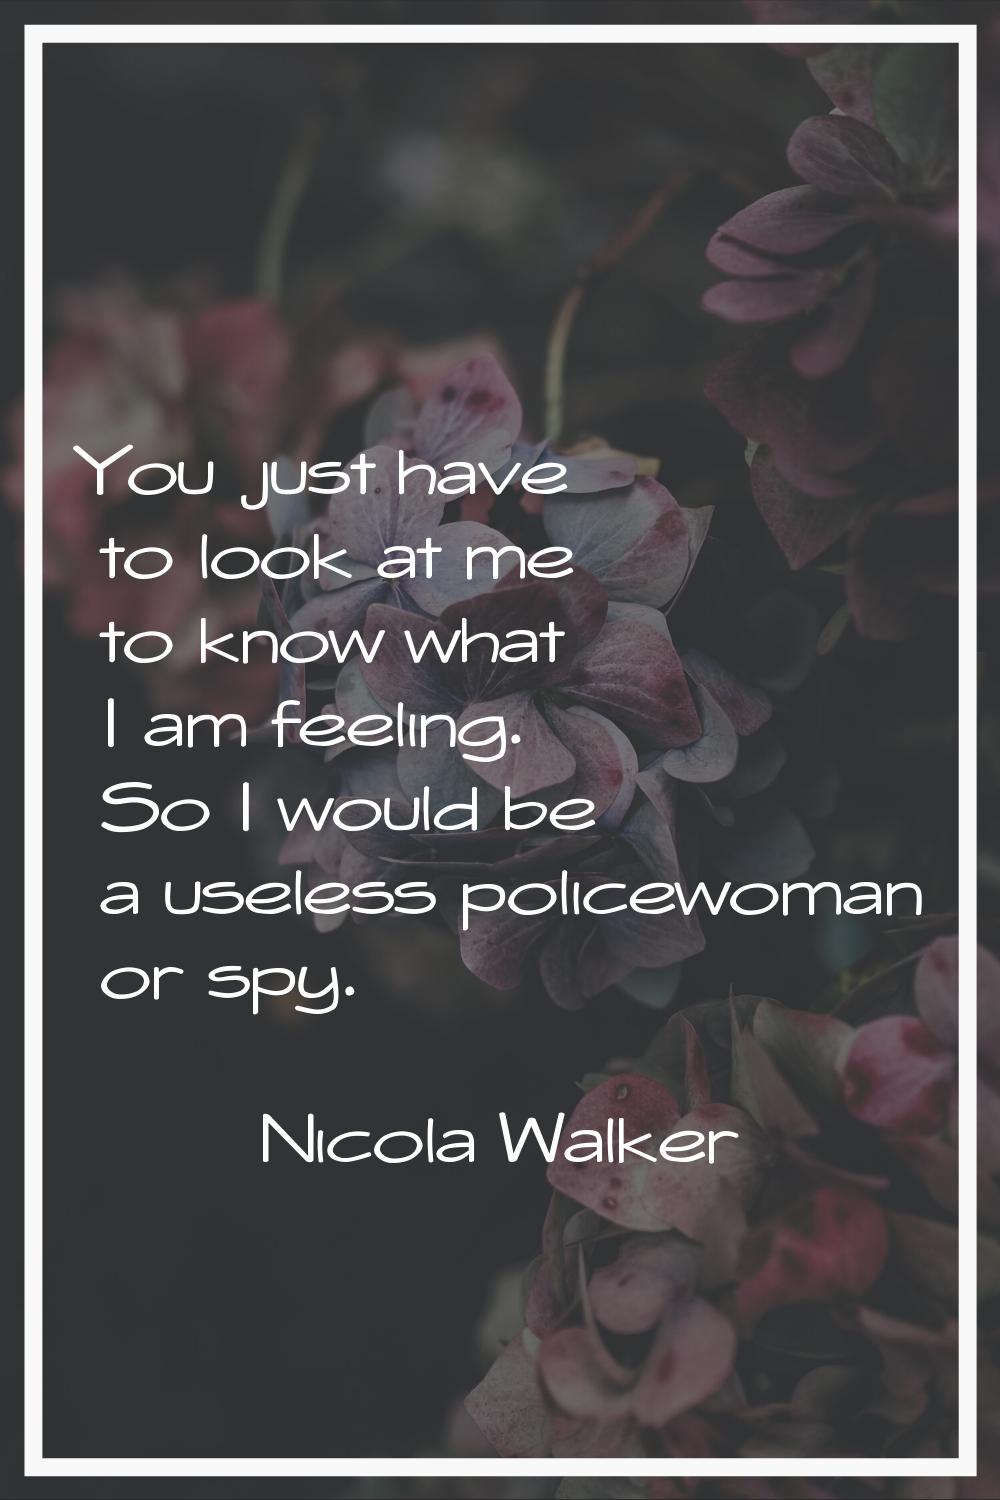 You just have to look at me to know what I am feeling. So I would be a useless policewoman or spy.